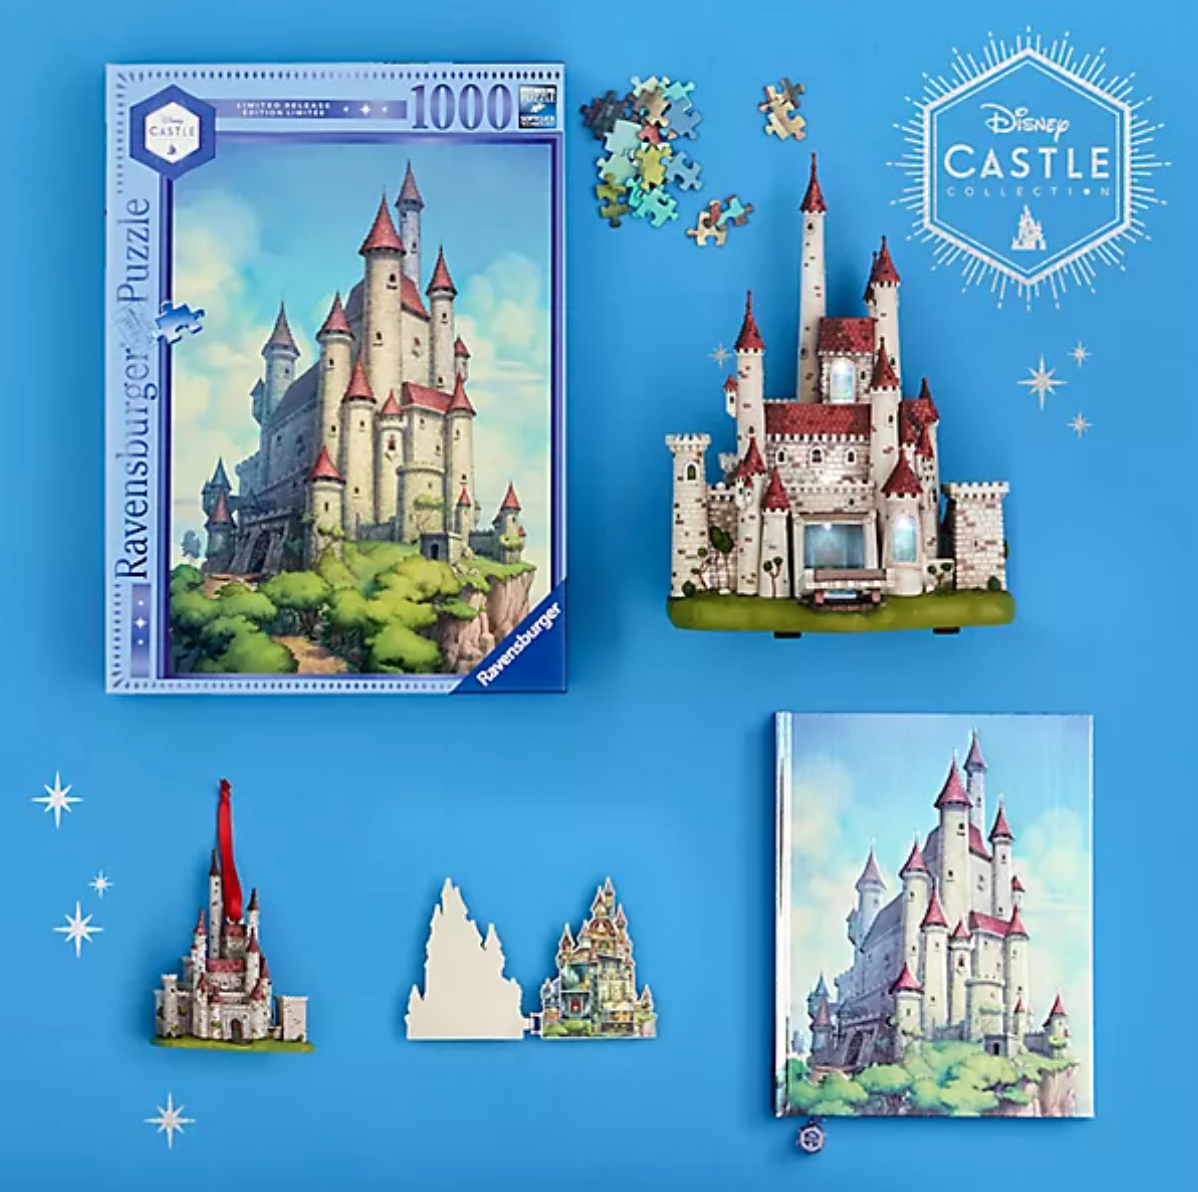 Disney S Snow White Castle Collection Merch Is Coming Soon Here S When The Disney Food Blog